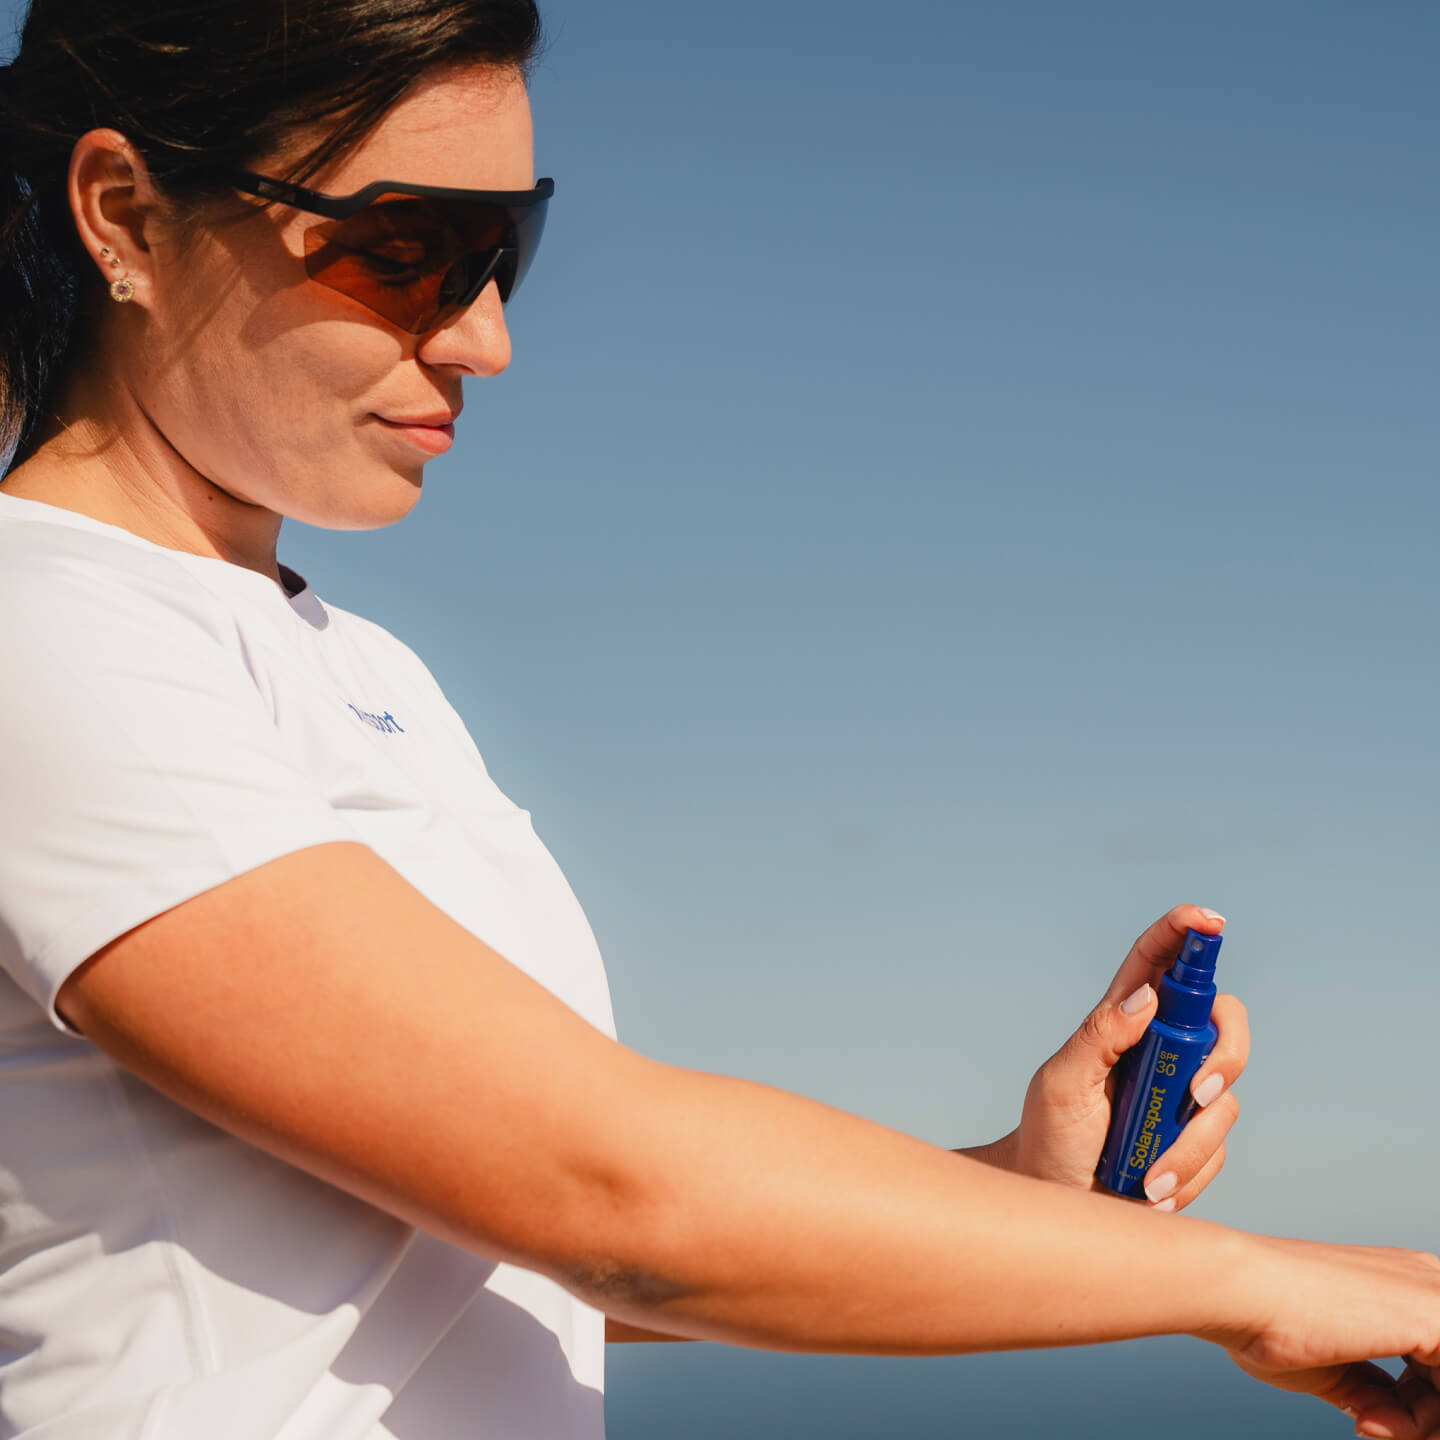 Protect. Pocket. Perform. Non-slip sunscreen: For when Protection means Performance.